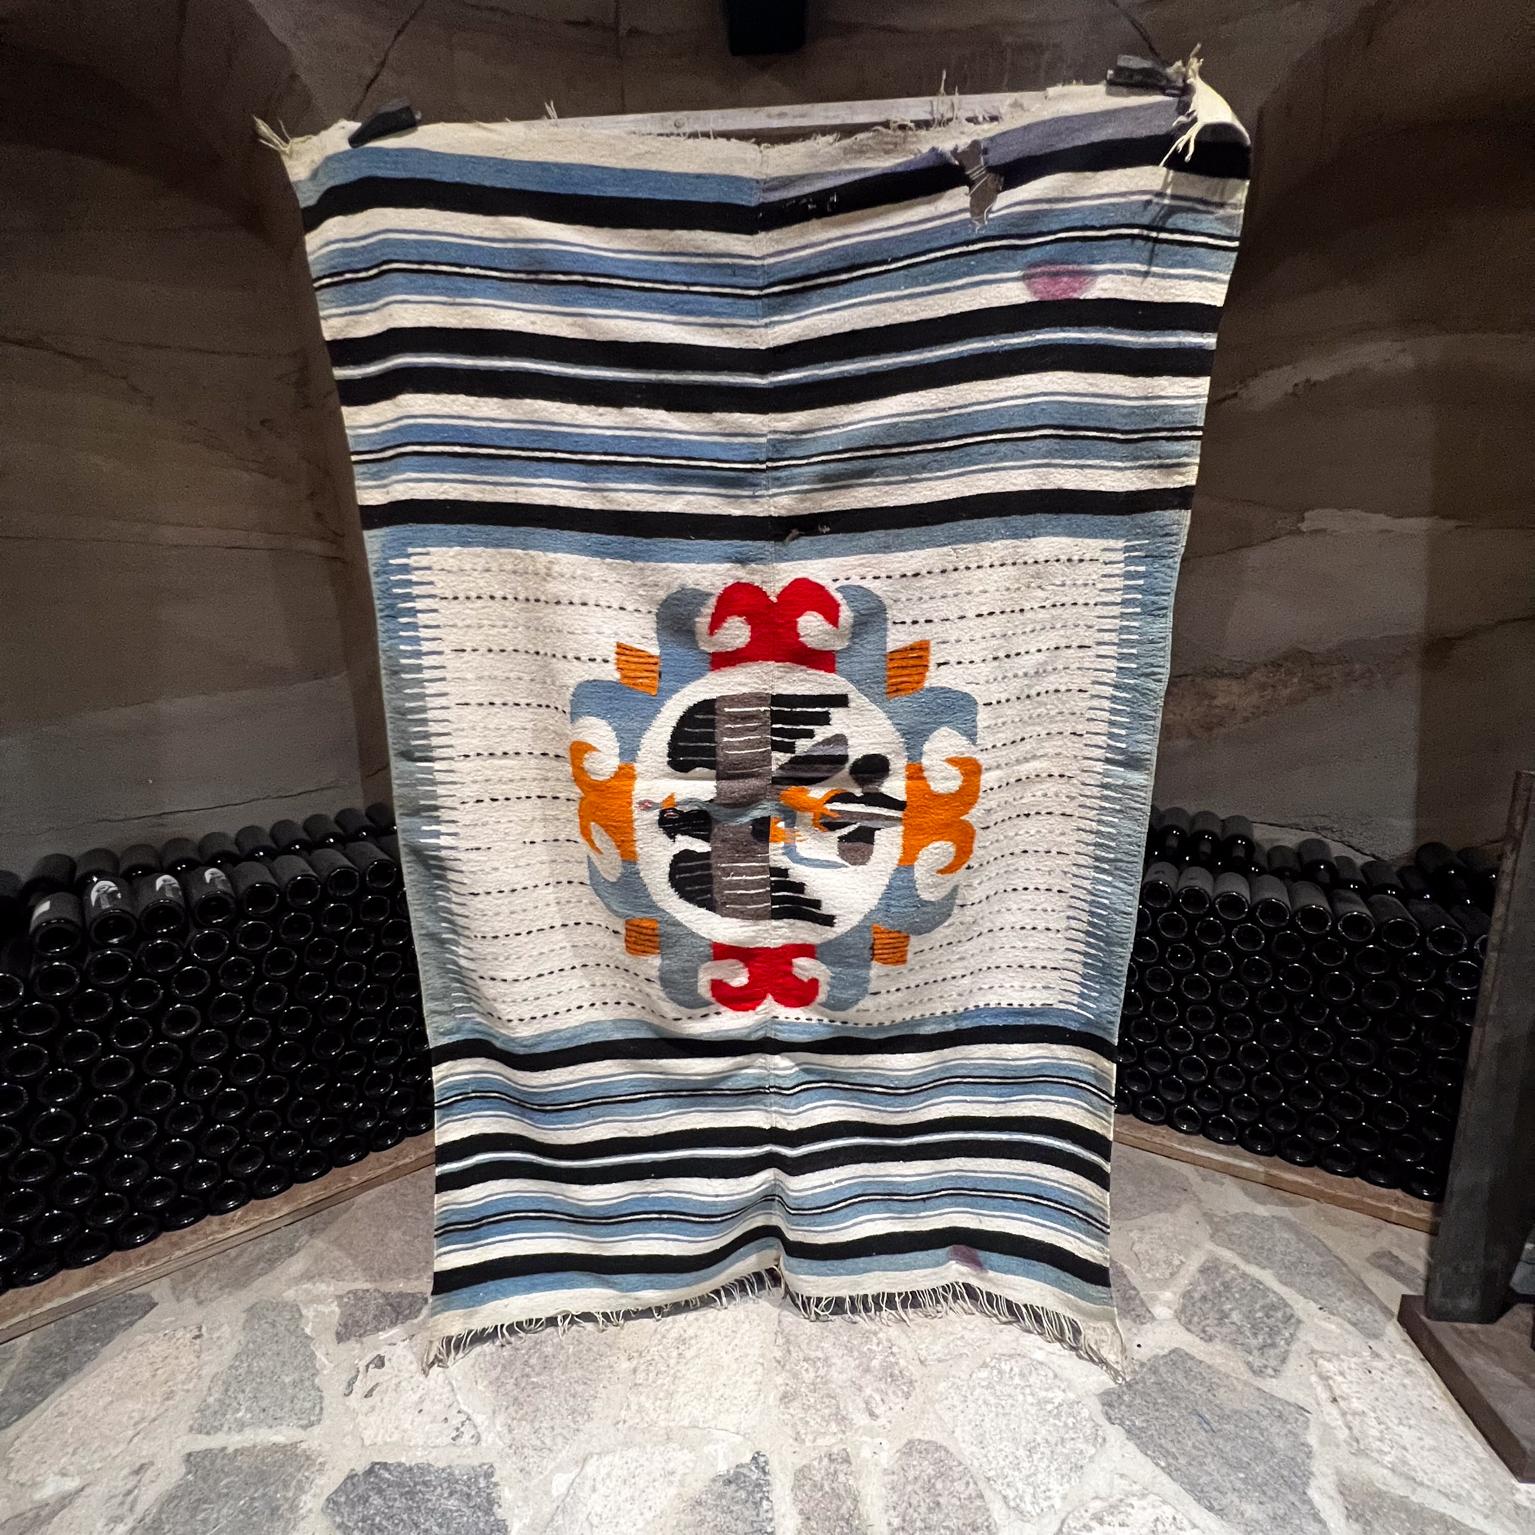 Midcentury Vintage Textile Art Majestic Mexican Eagle Blanket
50 x 74
Original preowned vintage condition. Unrestored. Wear visible.
See all images.